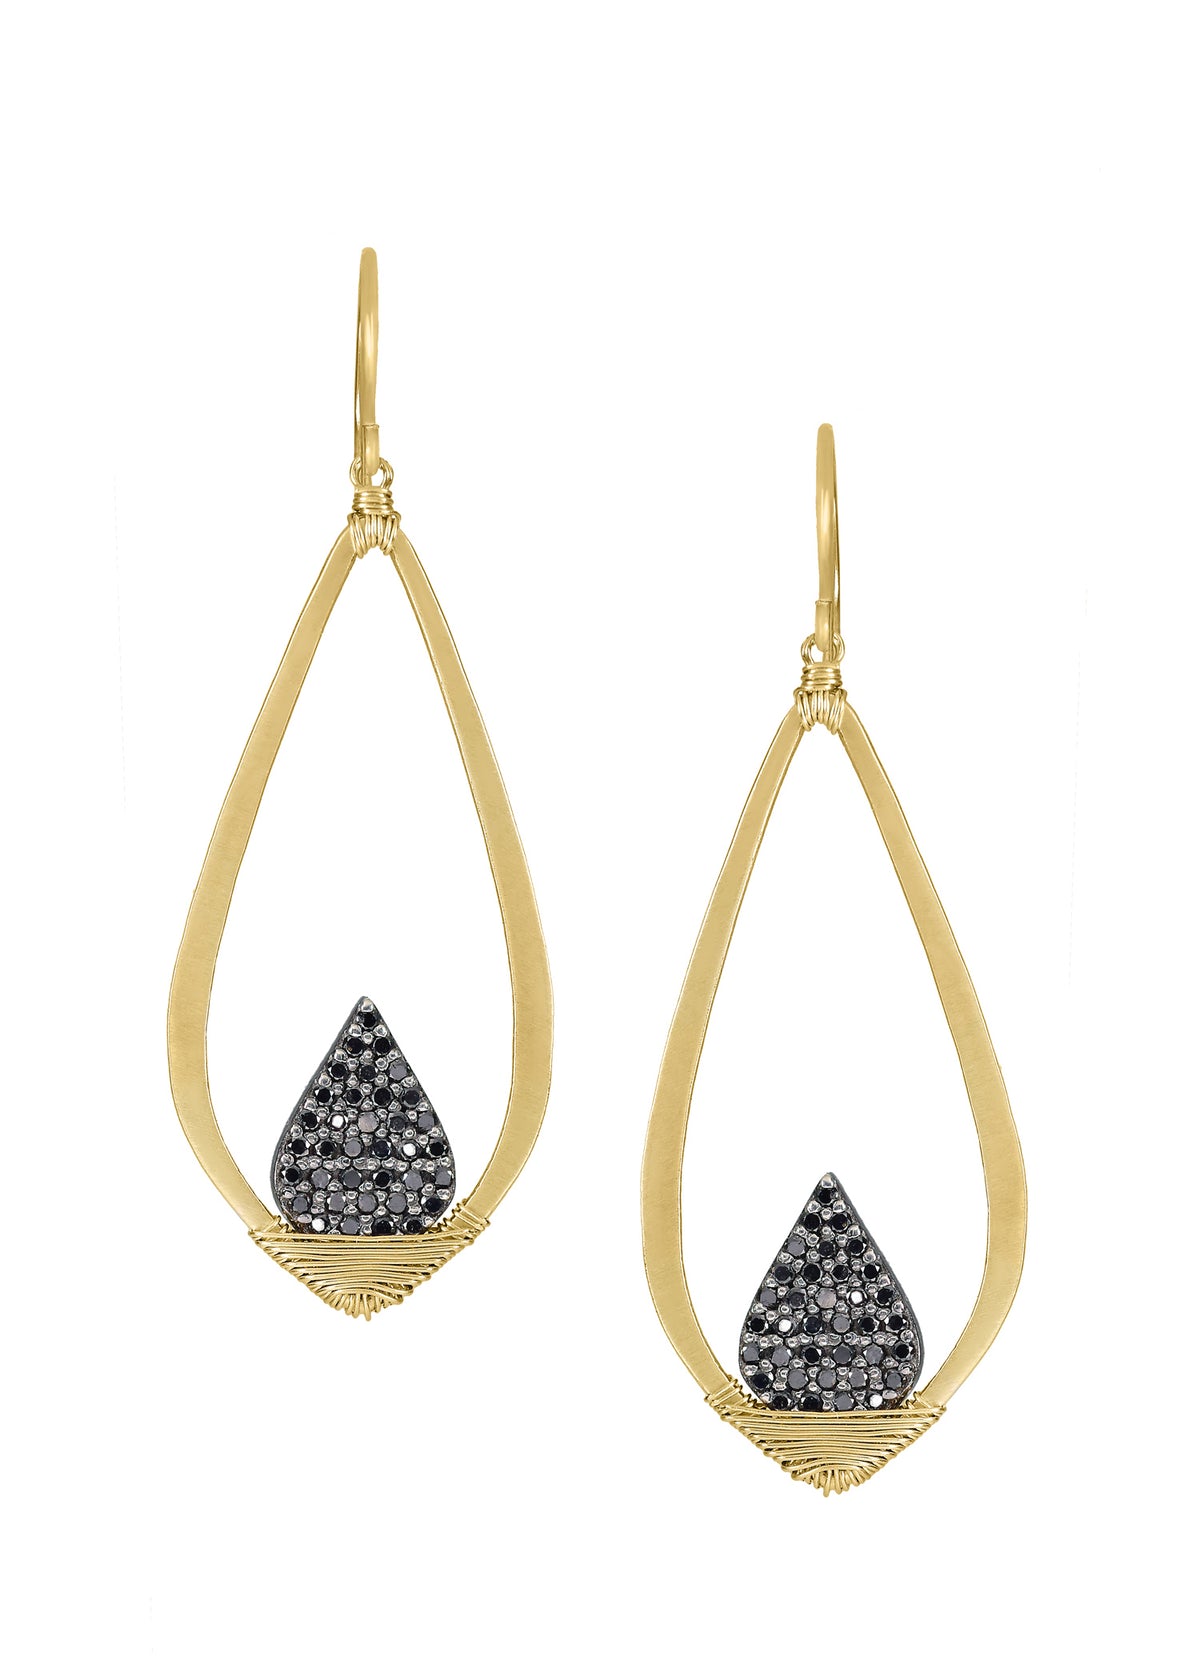 Black diamond 14k gold Sterling silver Mixed metal Earrings measure 1-7/8&quot; in length (including the ear wires) and 5/8&quot; in width at the widest point Special order only Handmade in our Los Angeles studio